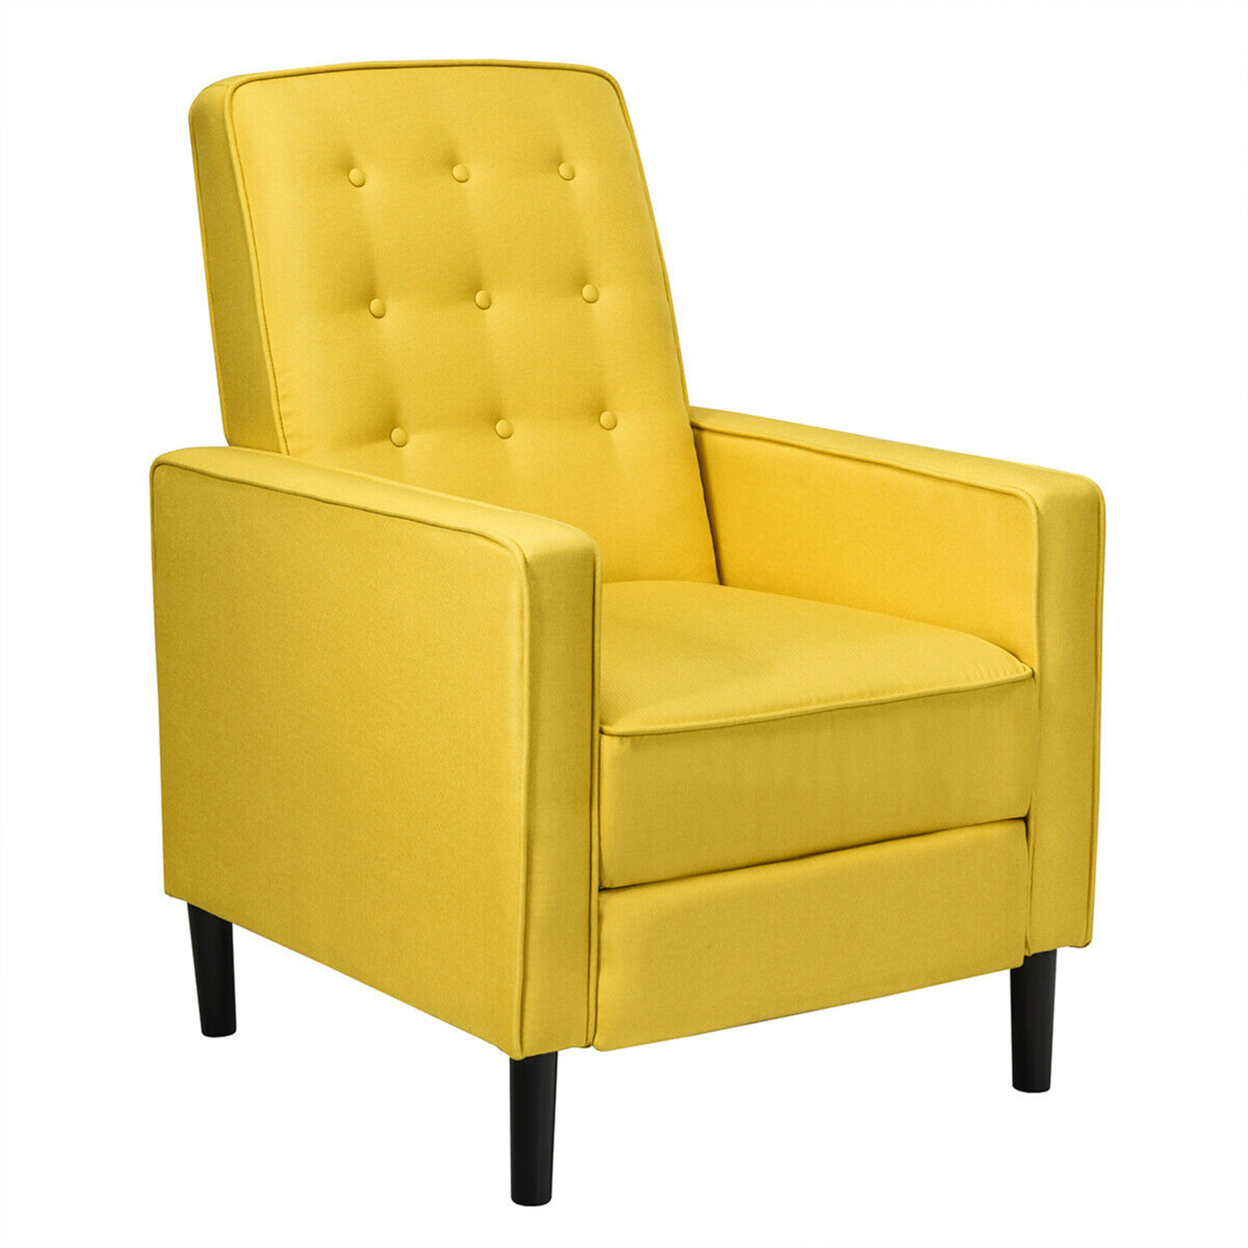 Mid-Century Push Back Recliner Chair Fabric Tufted Single Sofa W/Footrest - Yellow